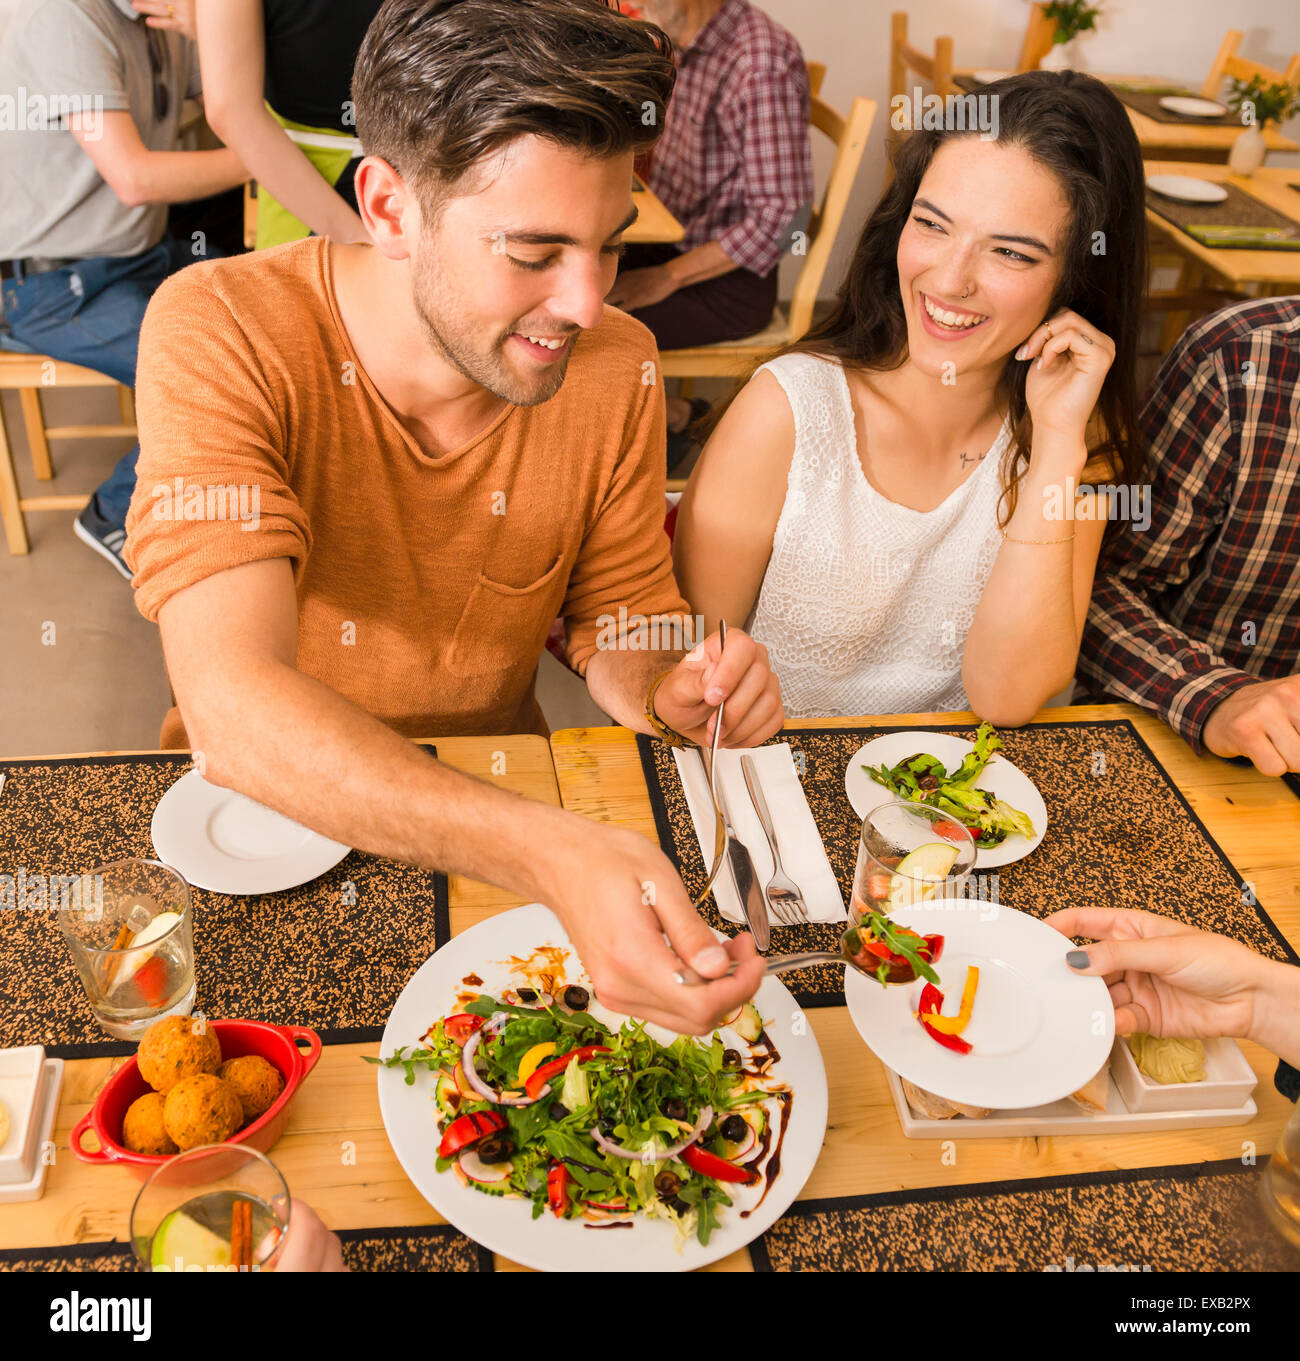 Happy couple at the restaurant and being served of food in the plate Stock Photo